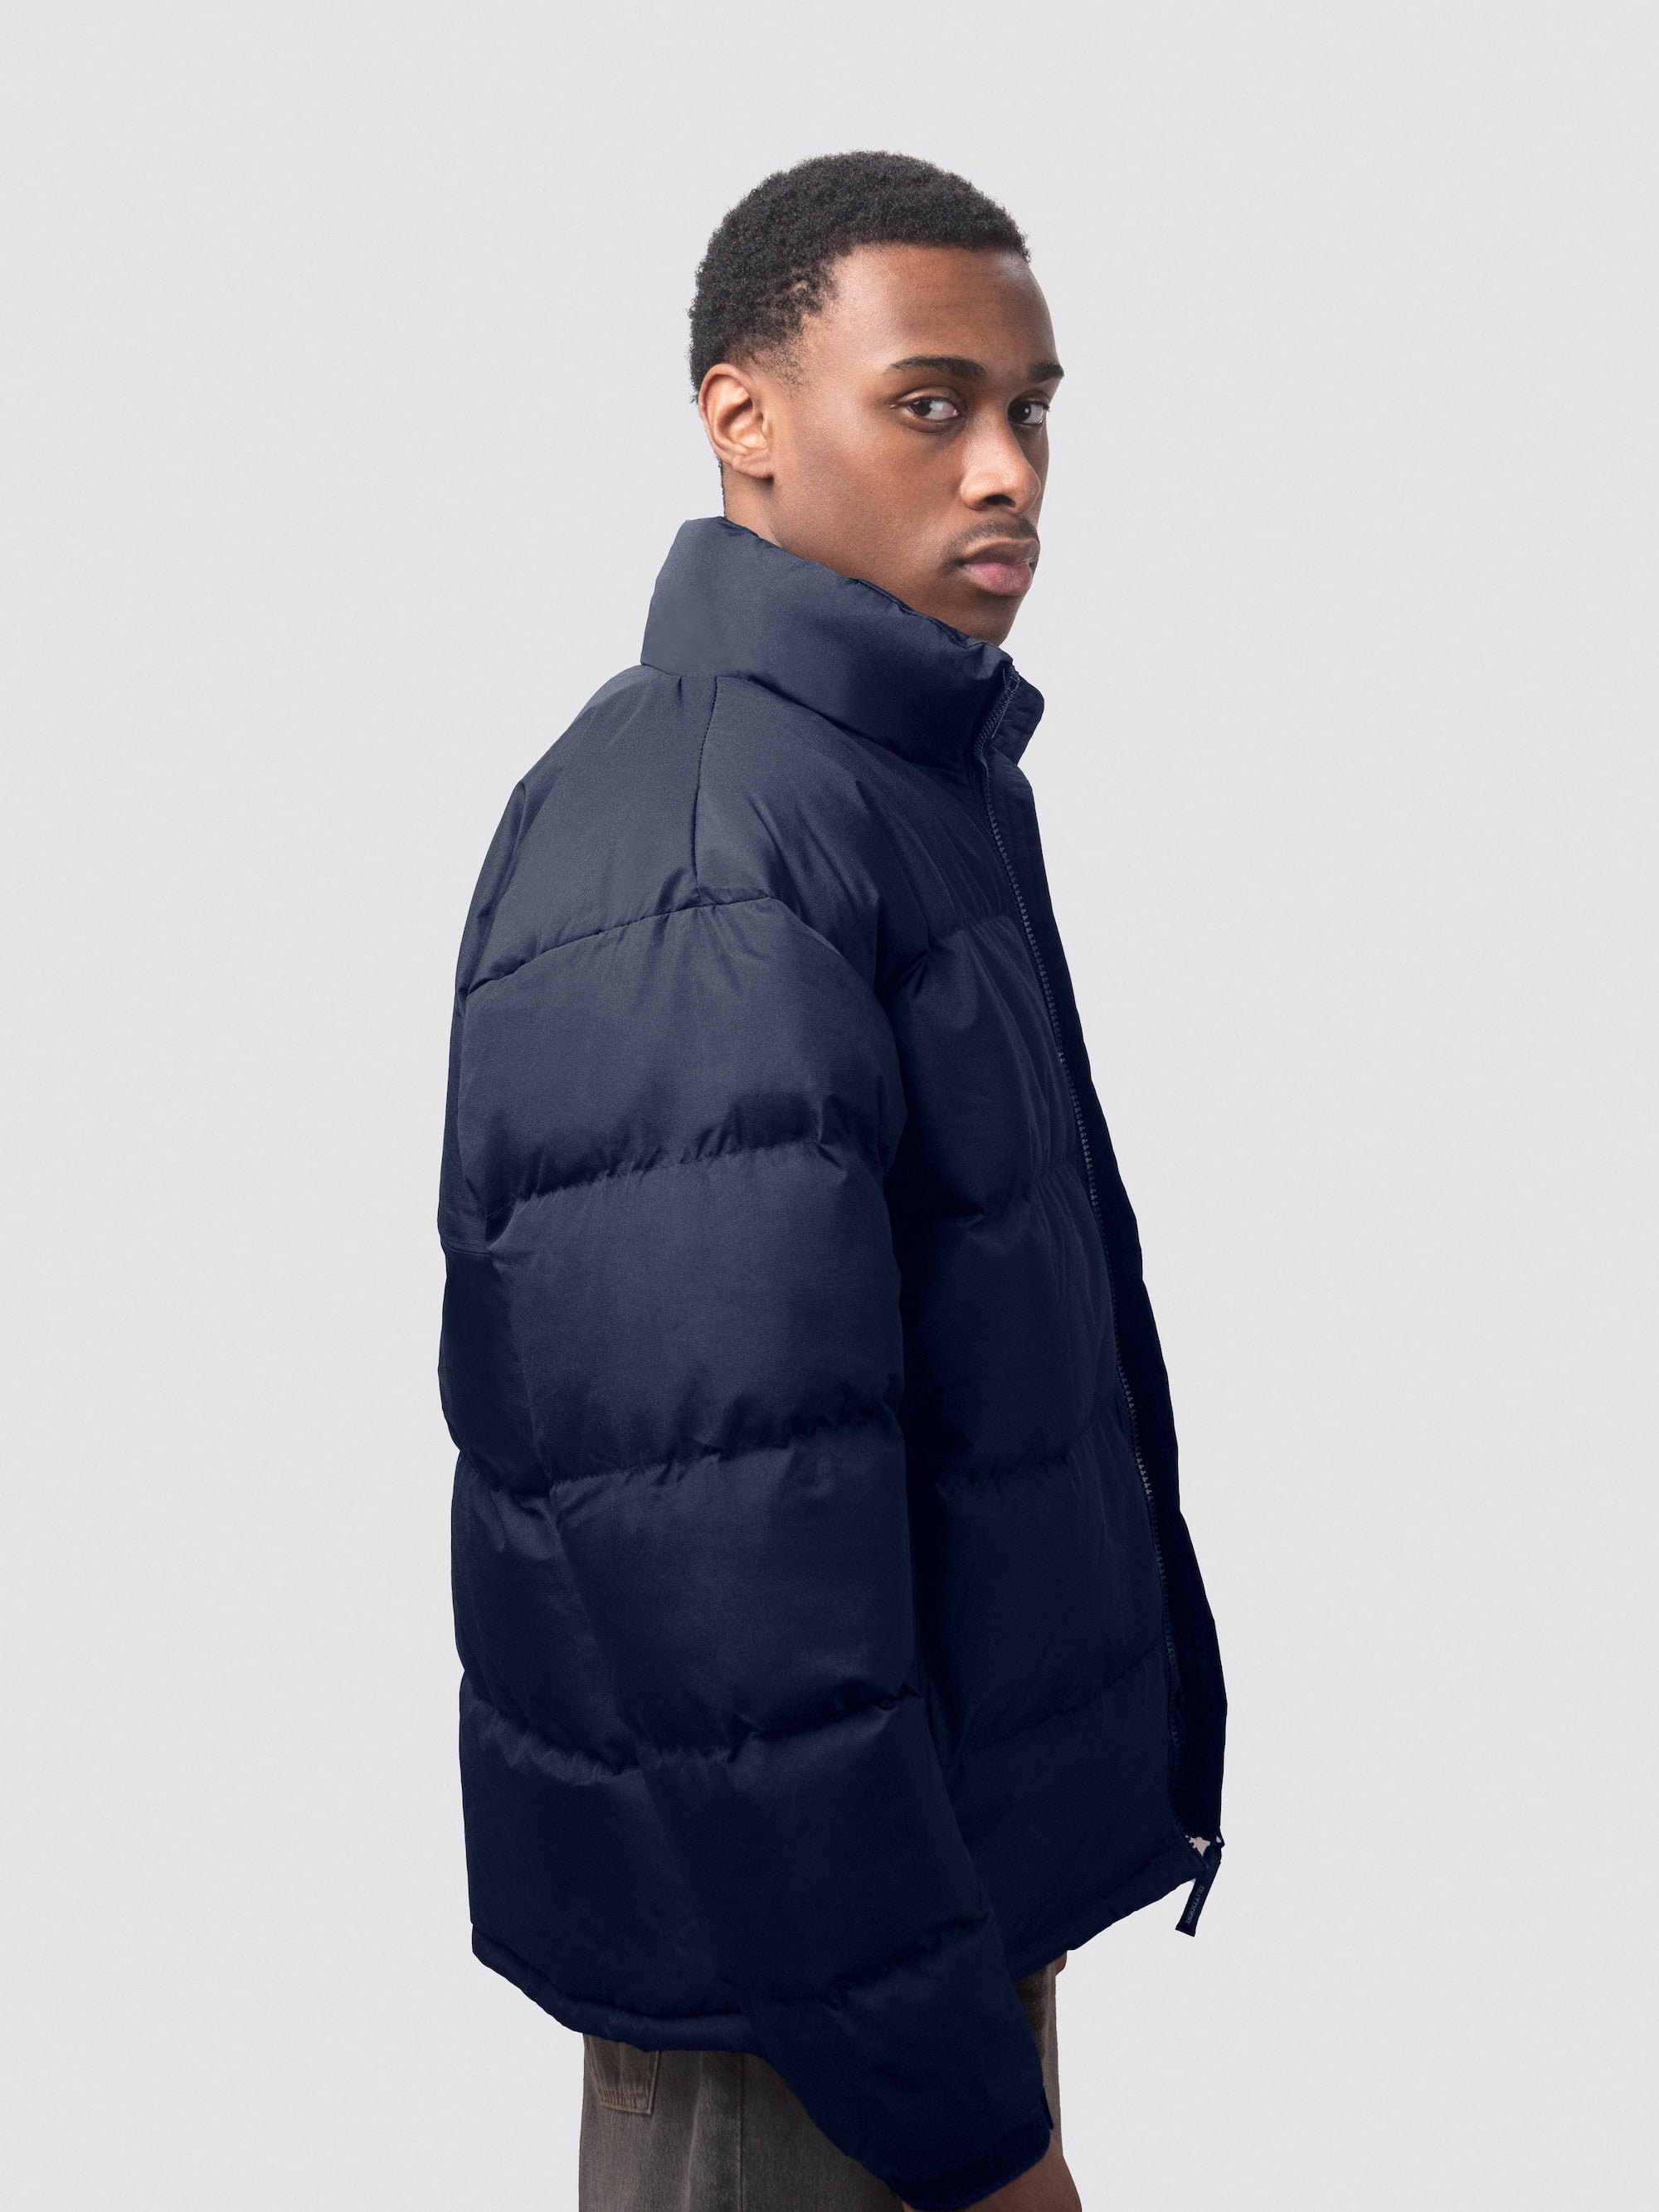 Padded navy puffer jacket, with customisable name or initials